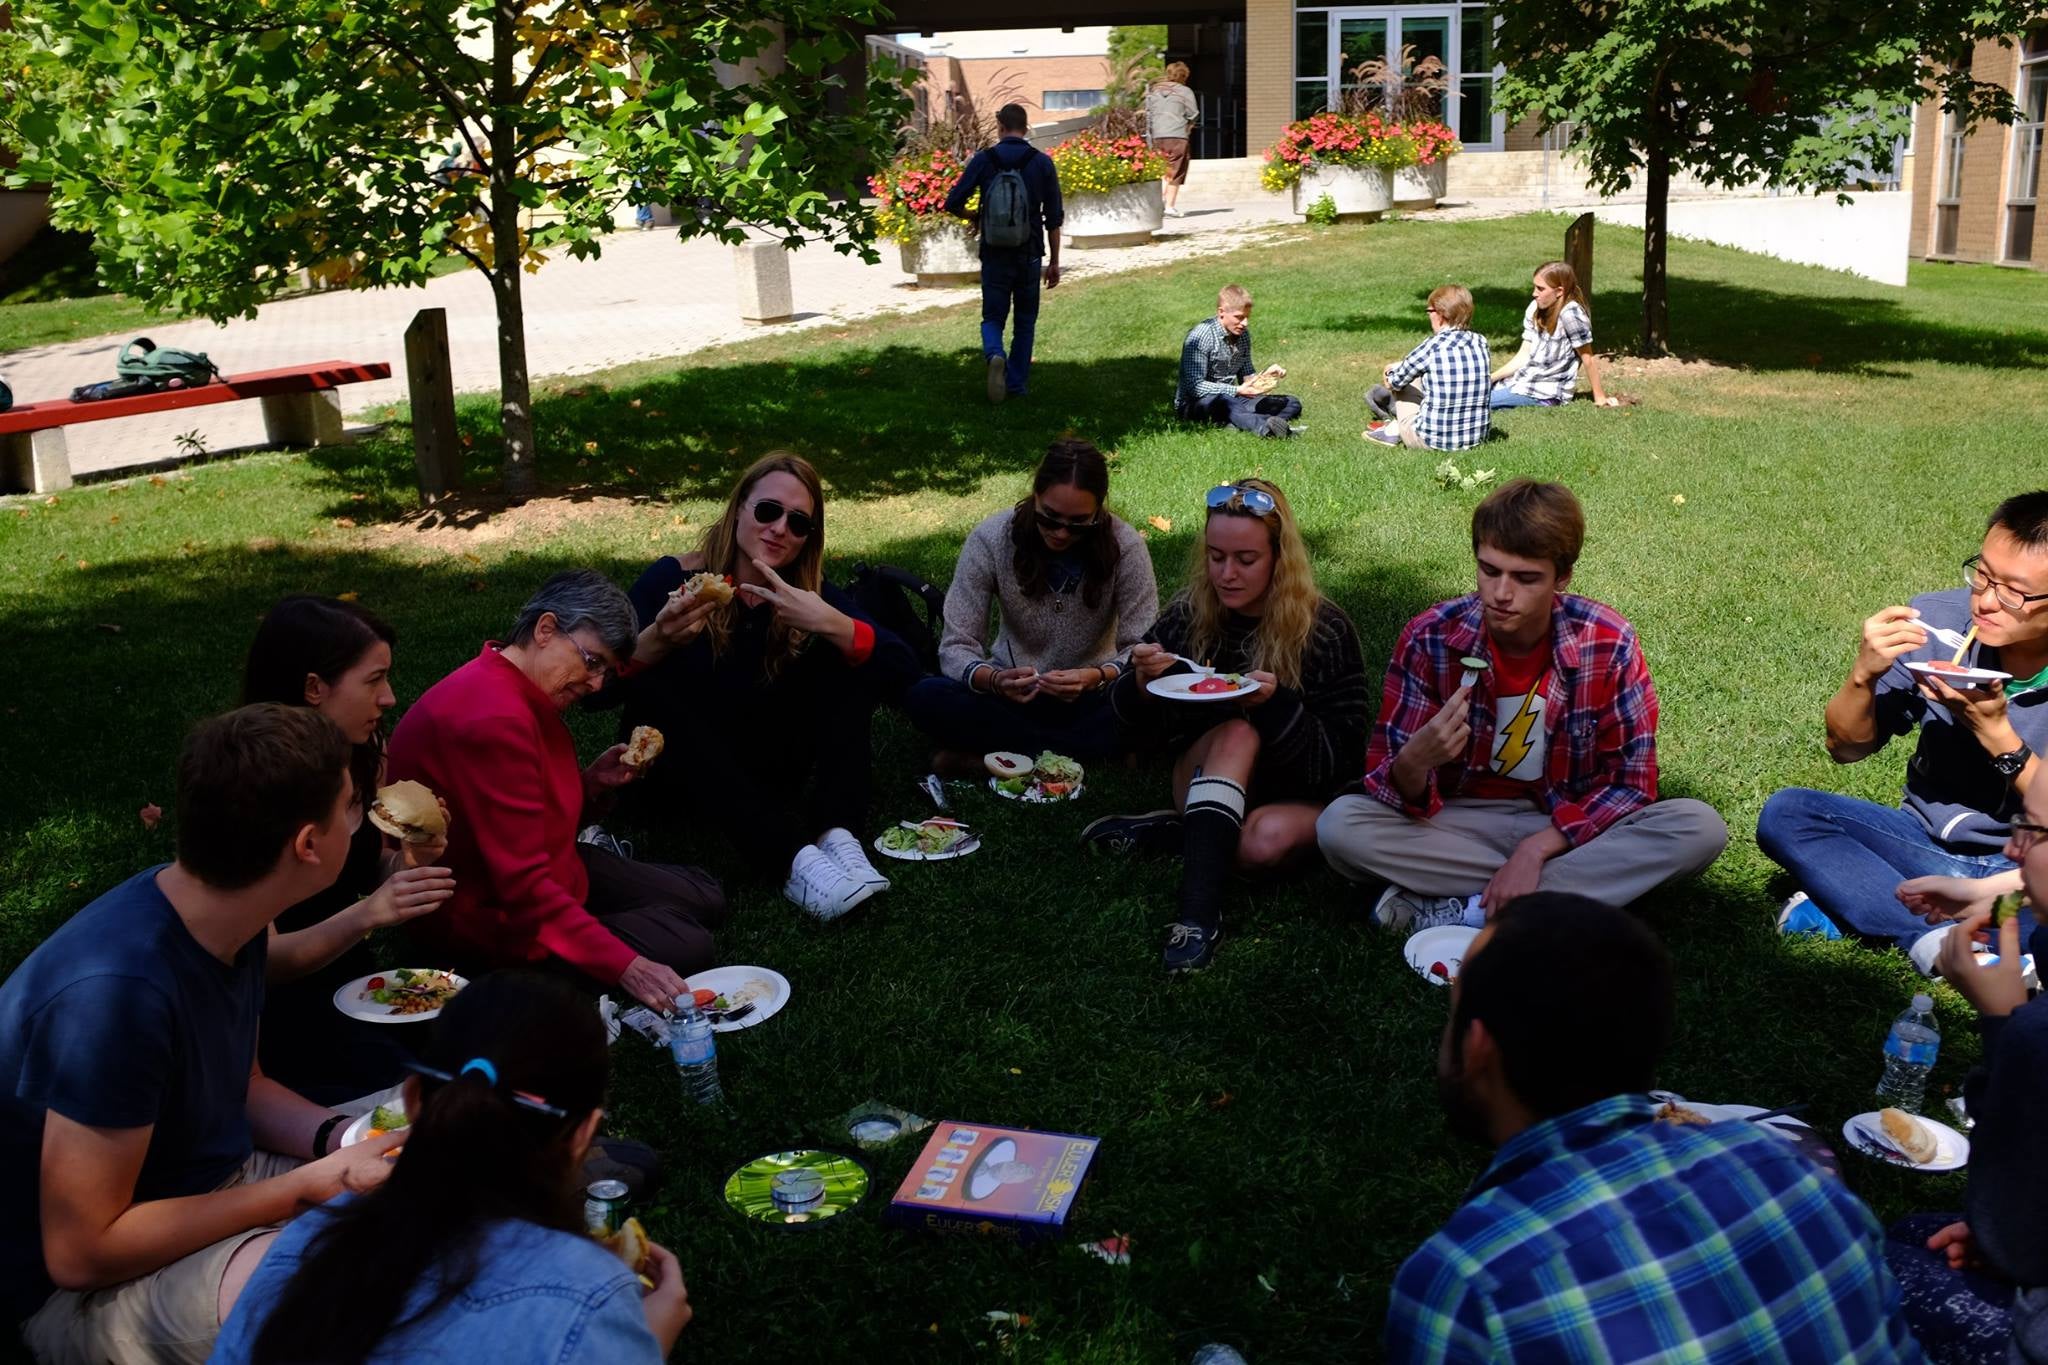 A group of young adults sit on the grass. In front of them is an assortment of food on foam plates.